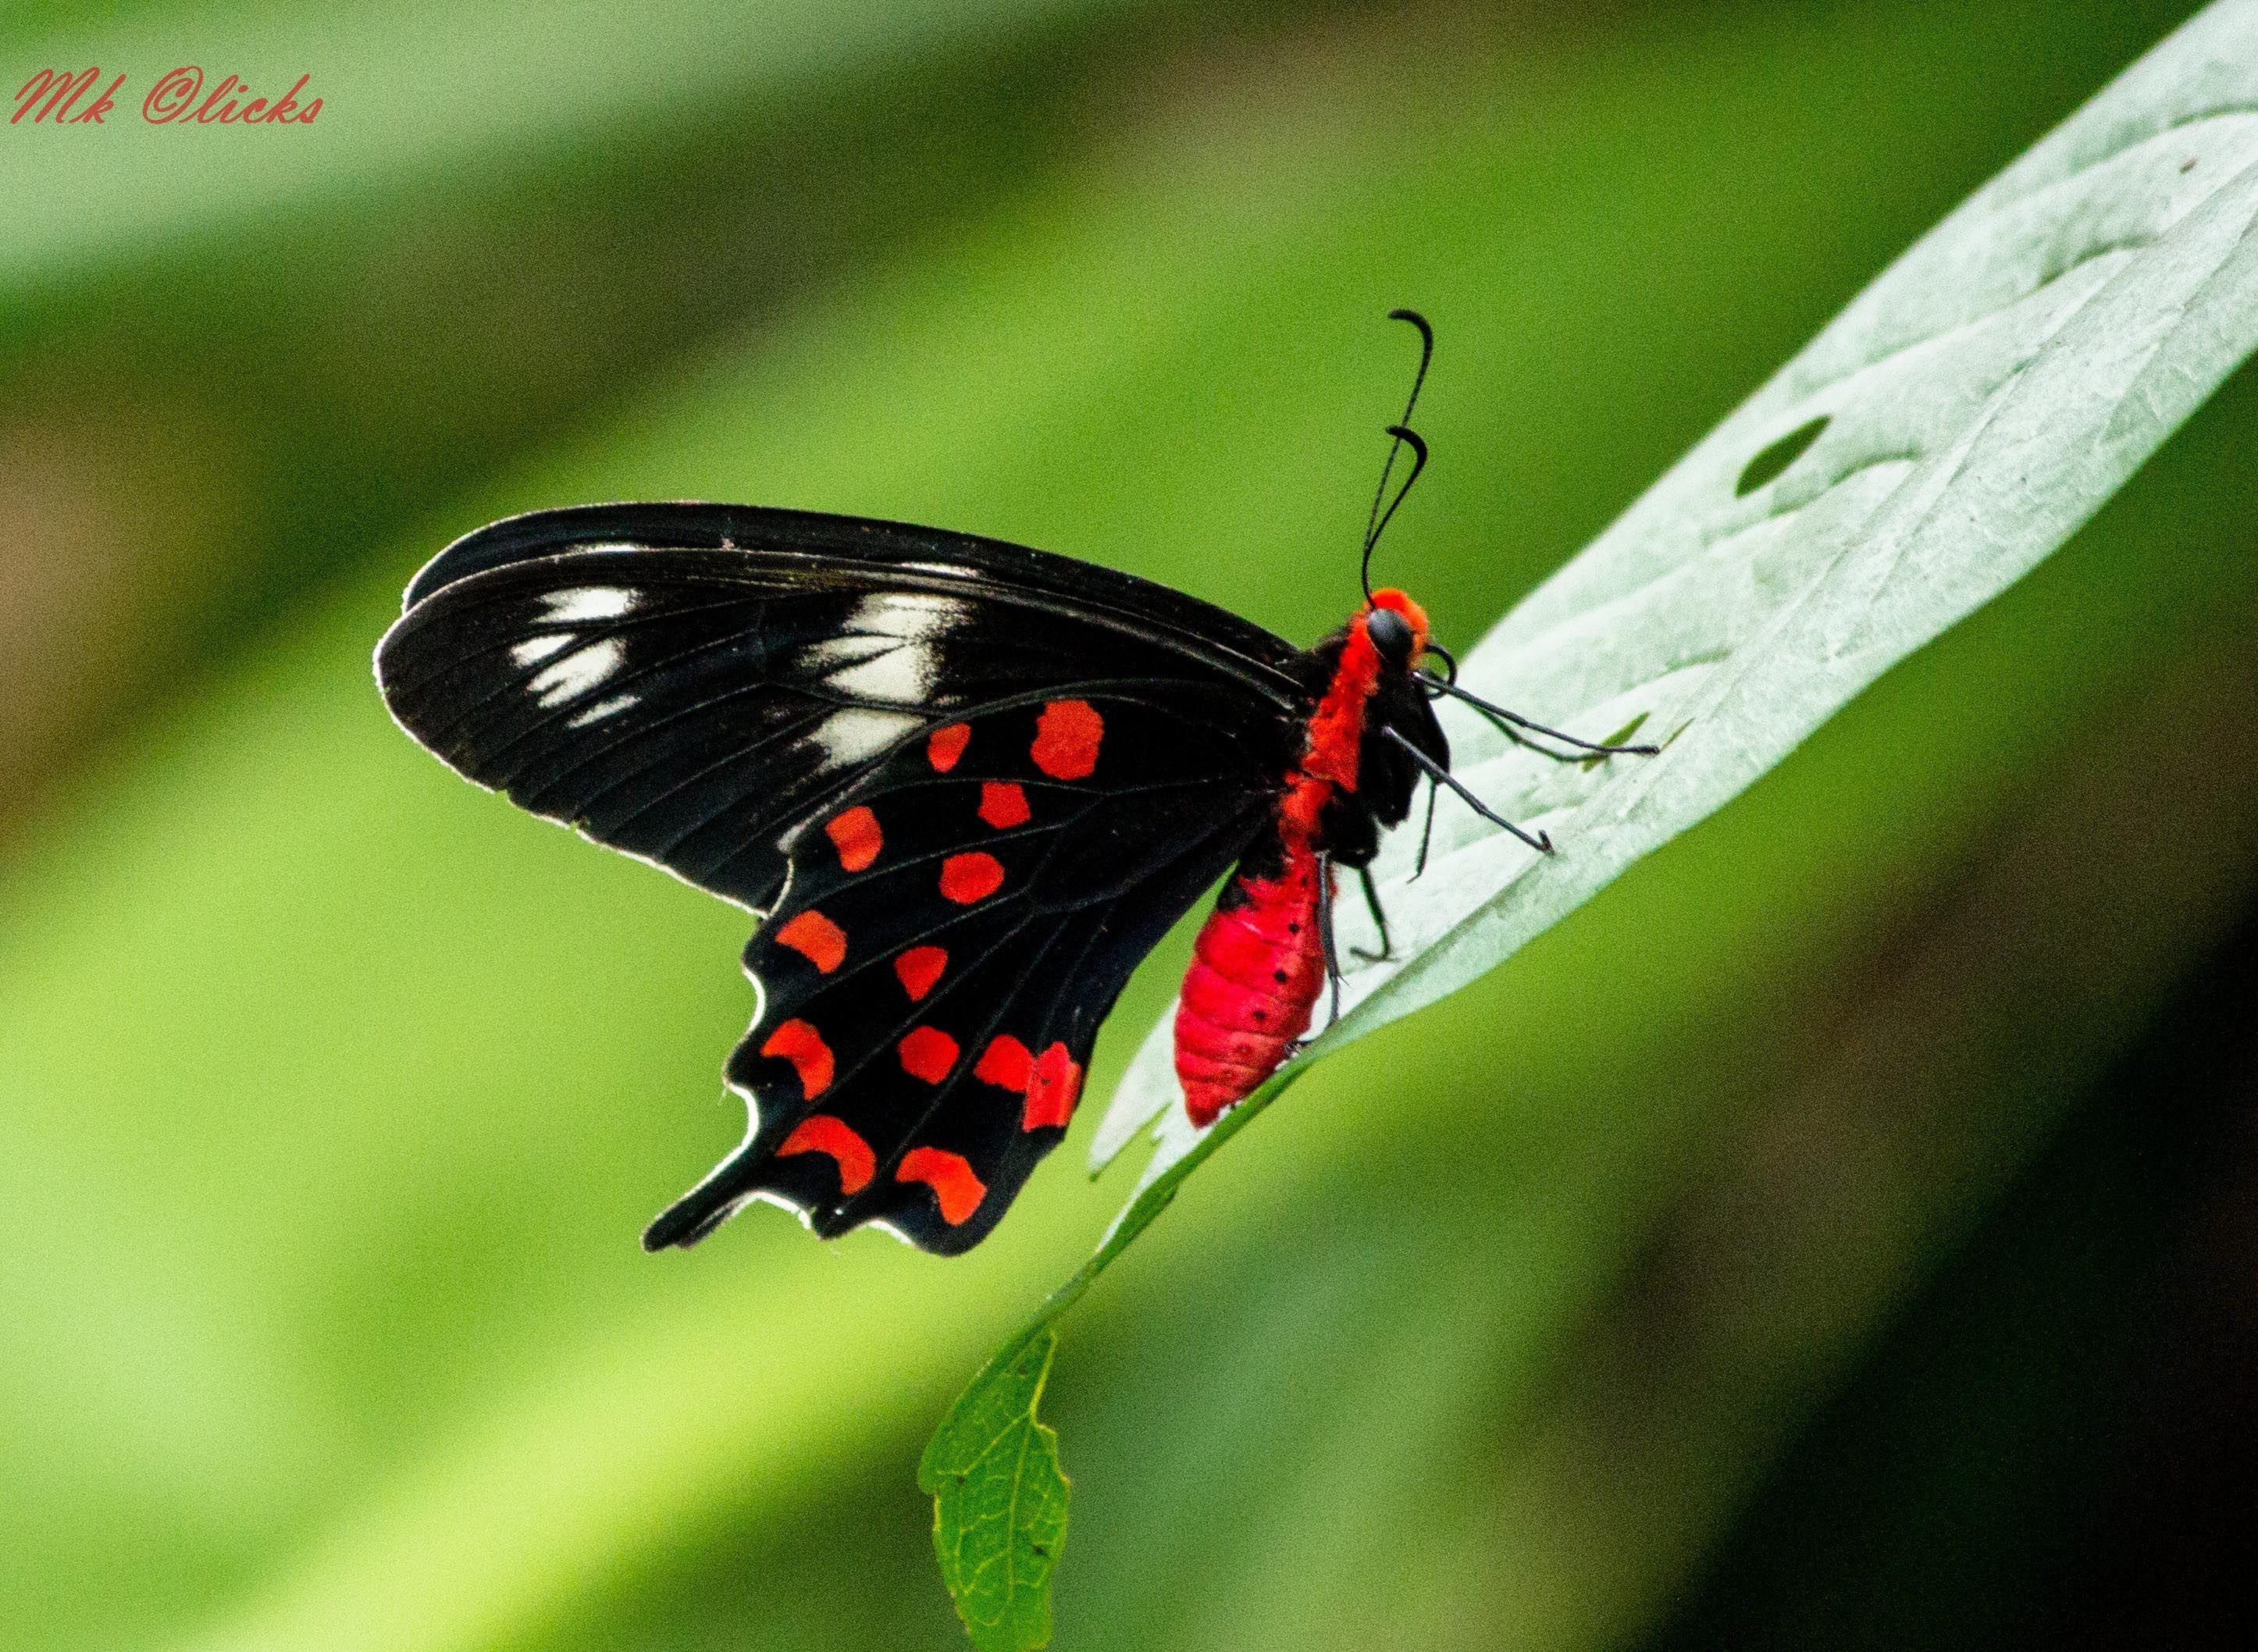 Black and Red Butterfly Logo - File:BLACK RED butterfly.jpg - Wikimedia Commons